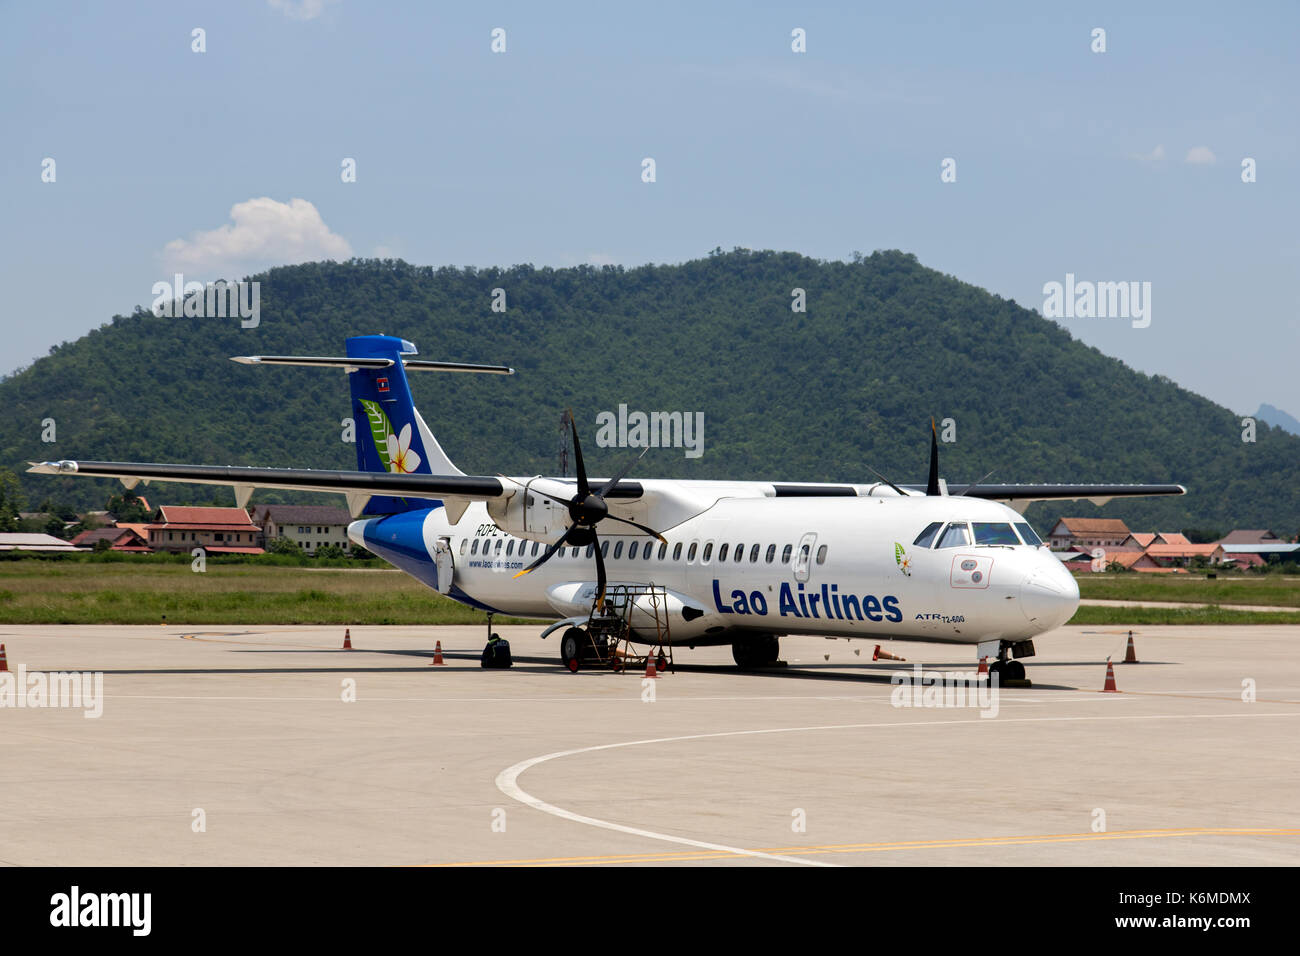 Lao Airlines aircraft is standing on a runway, Luang Prabang International Airport, Laos Stock Photo